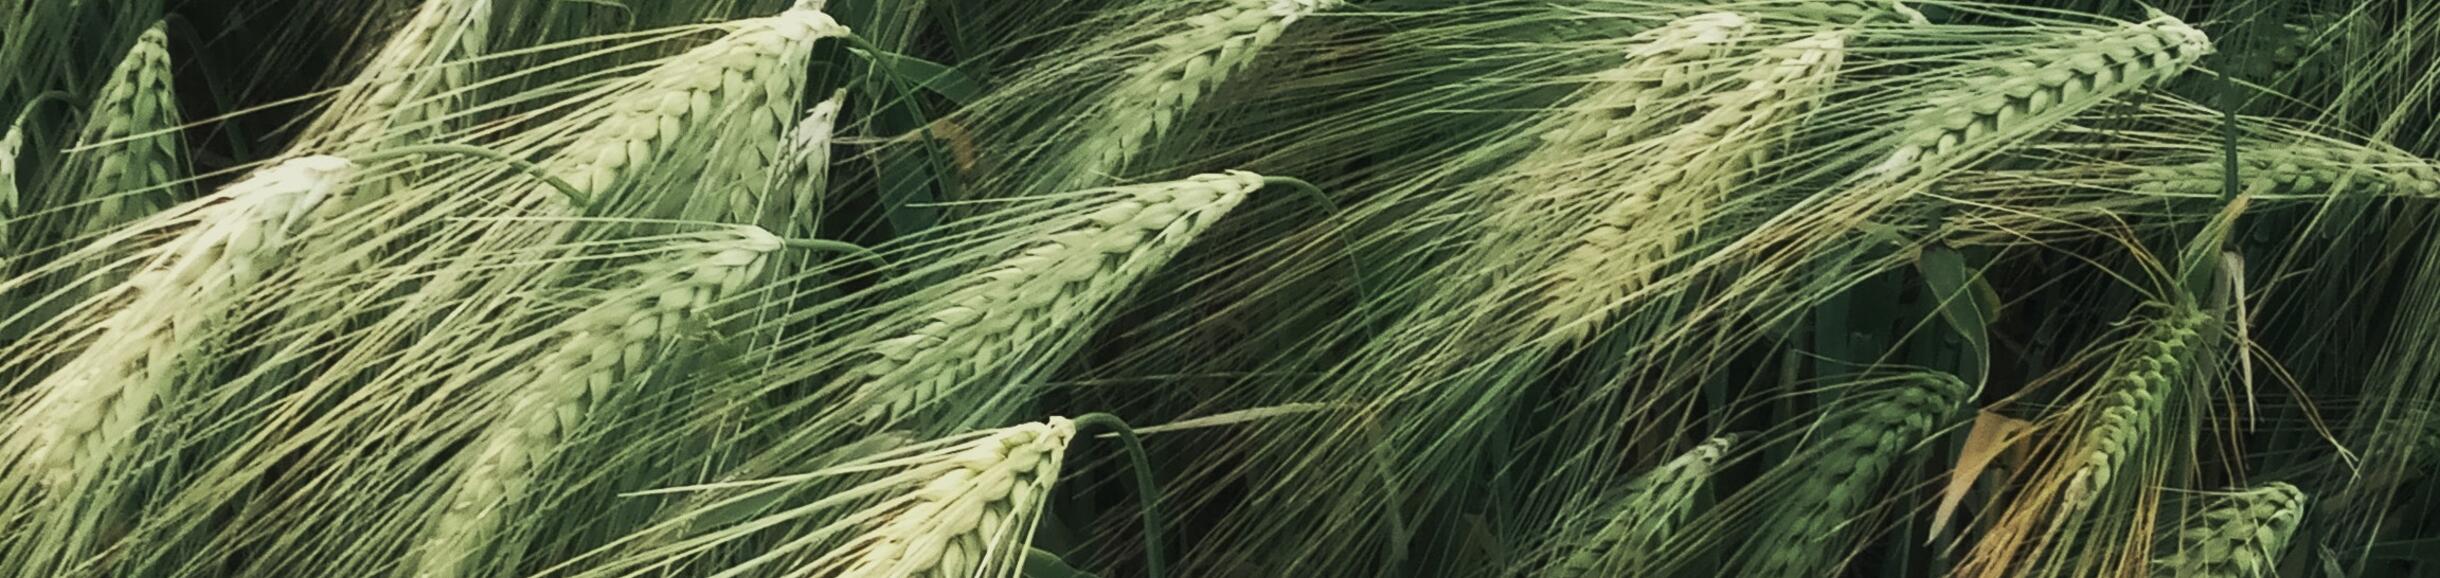 Picture of green wheat field